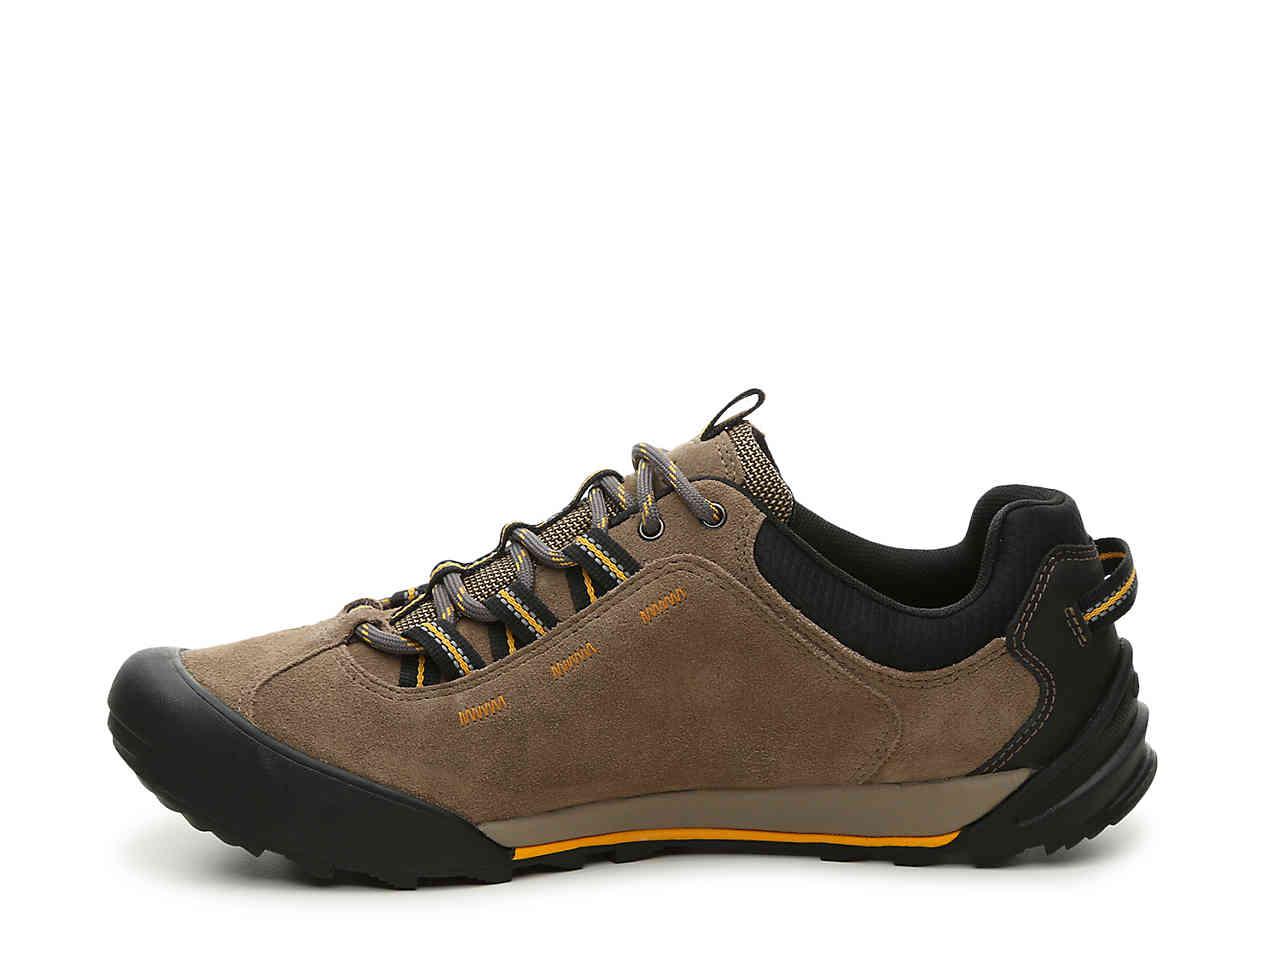 Clarks Suede Outlay Peak Walking Shoe in Taupe (Brown) for Men - Lyst